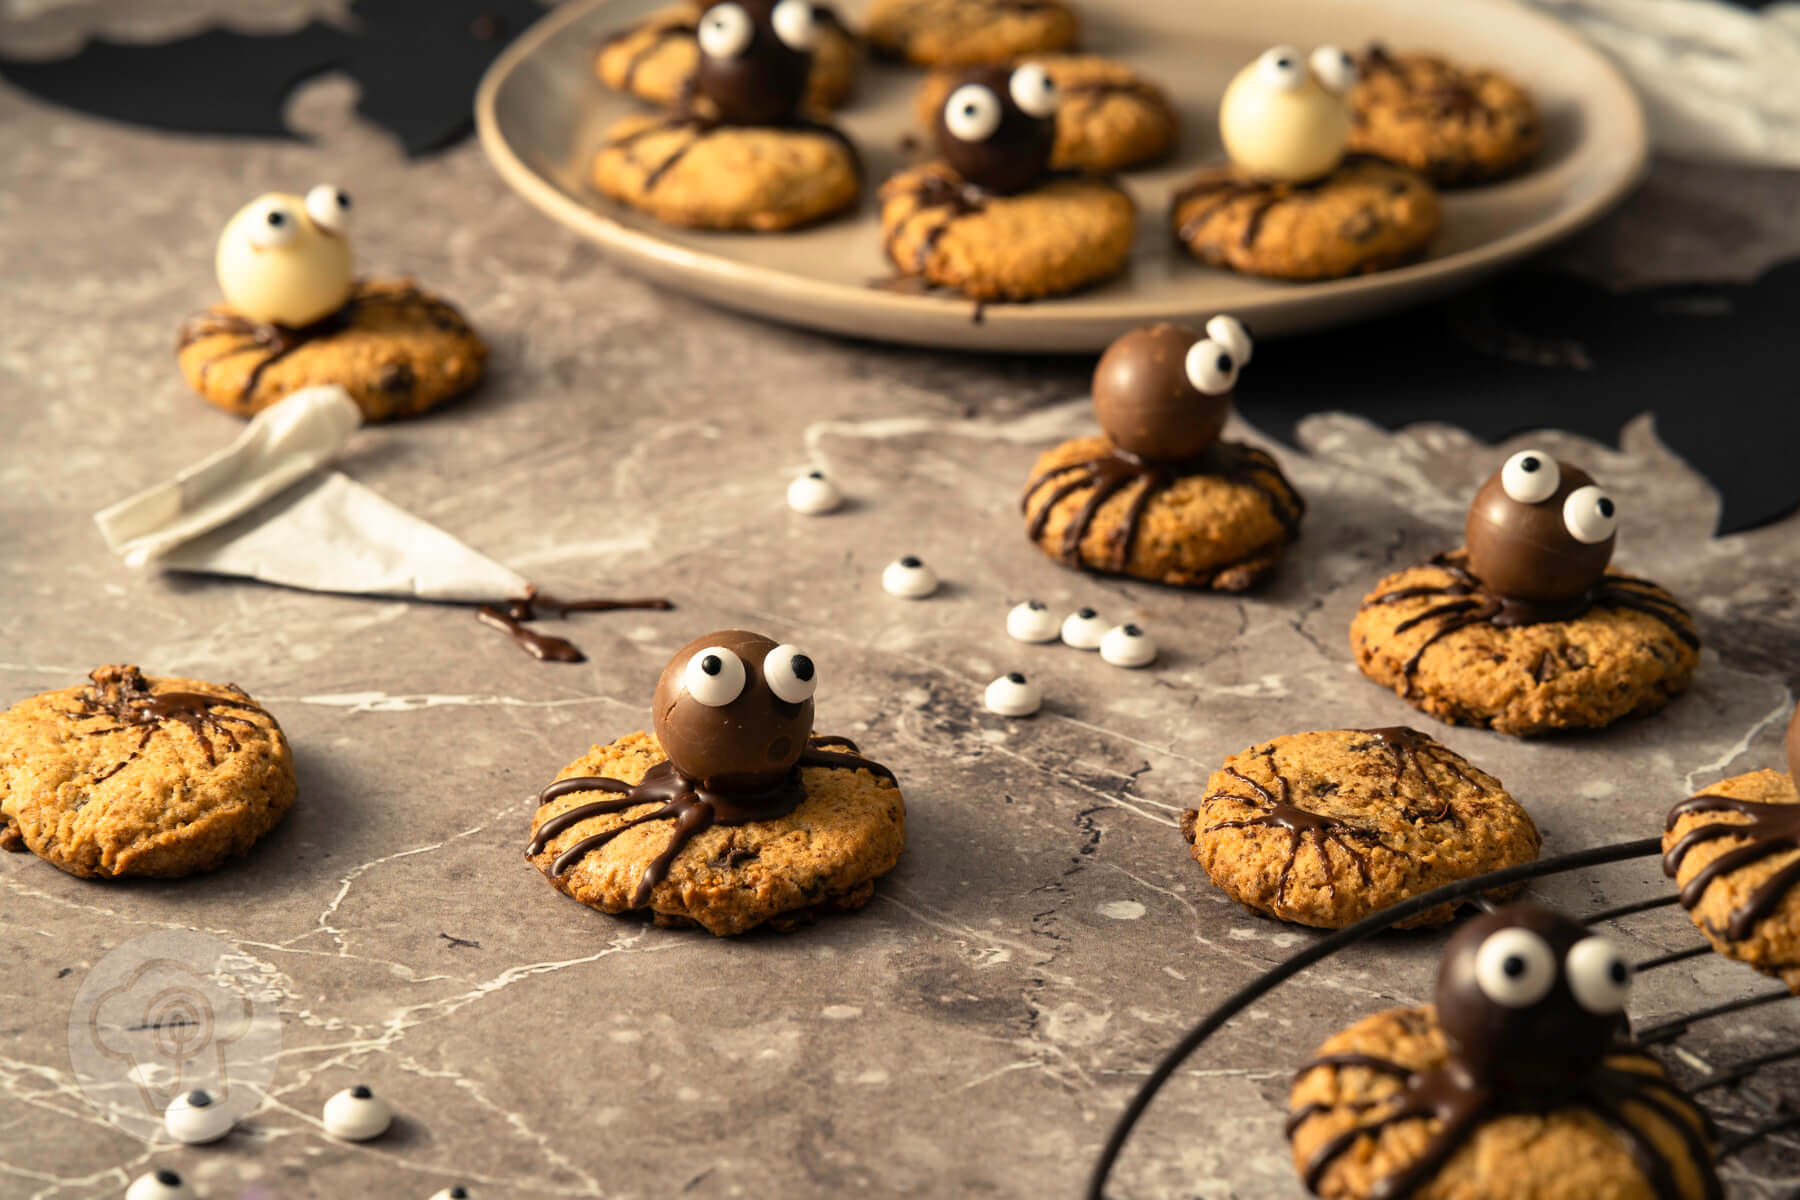 You are currently viewing Spinnenkekse – Cookies zu Halloween